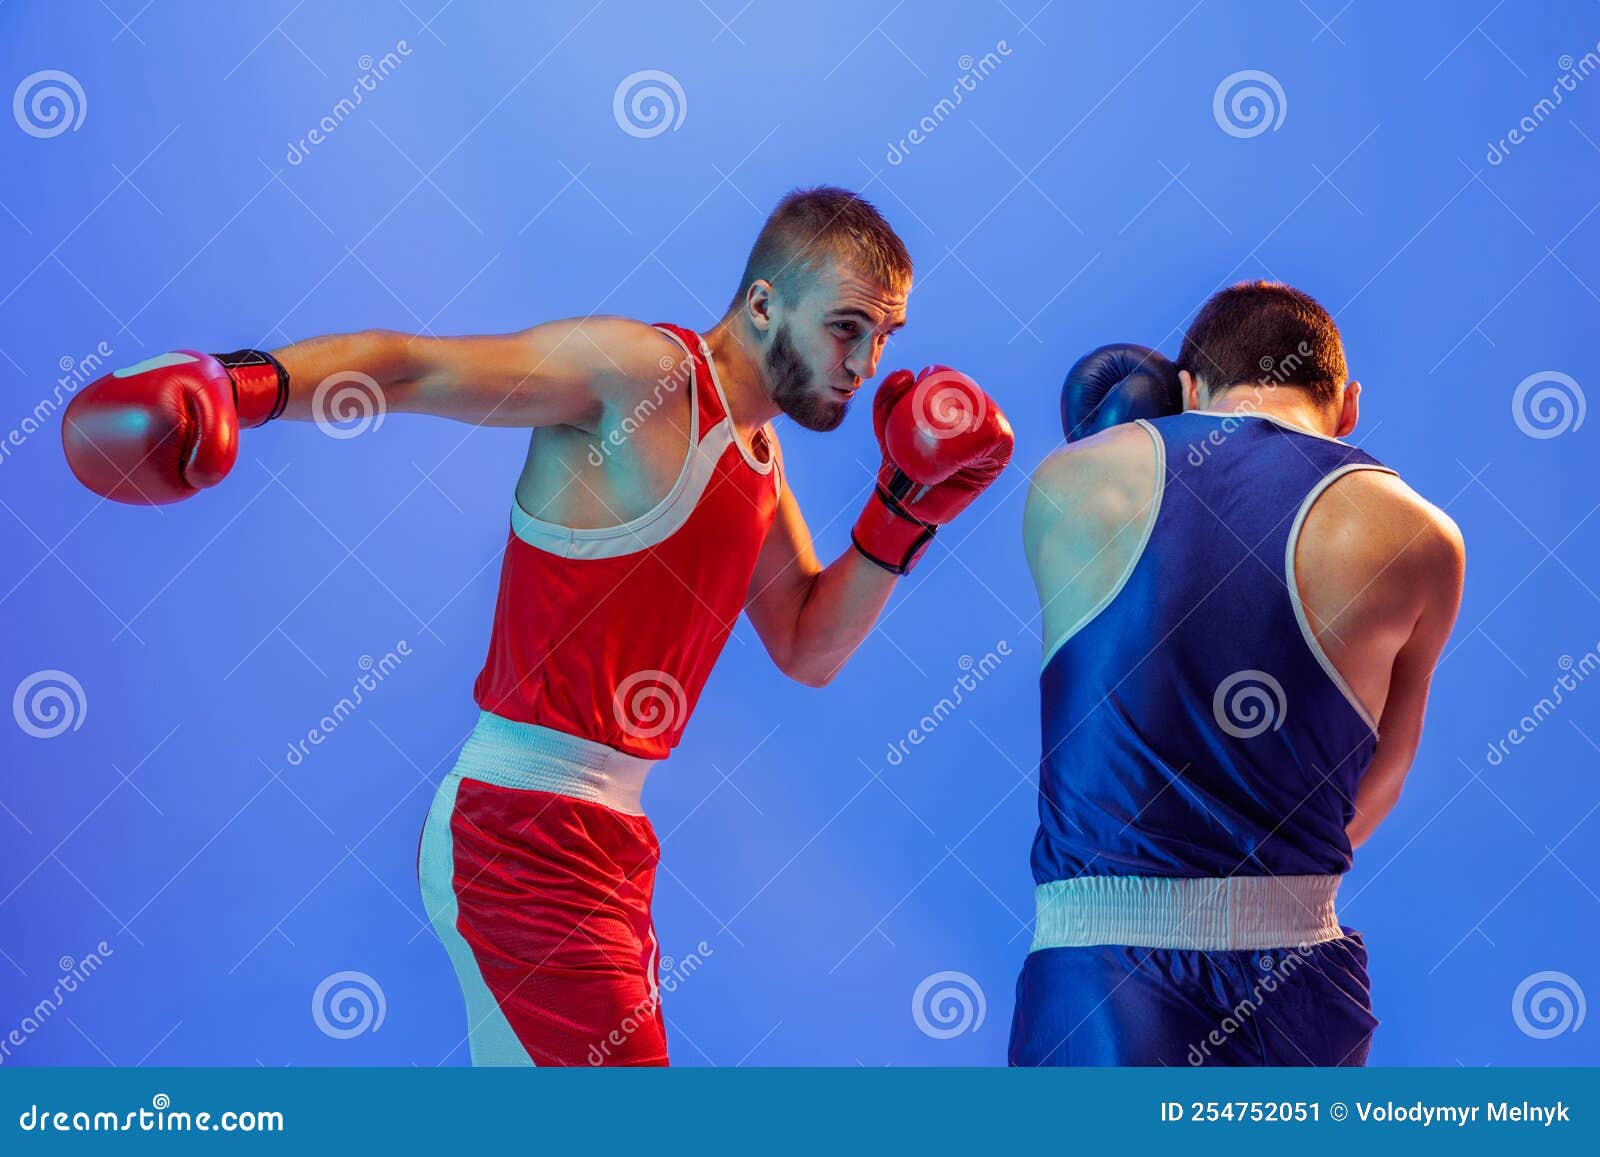 Right Hook. Male Professional Boxers in Red and Blue Sports